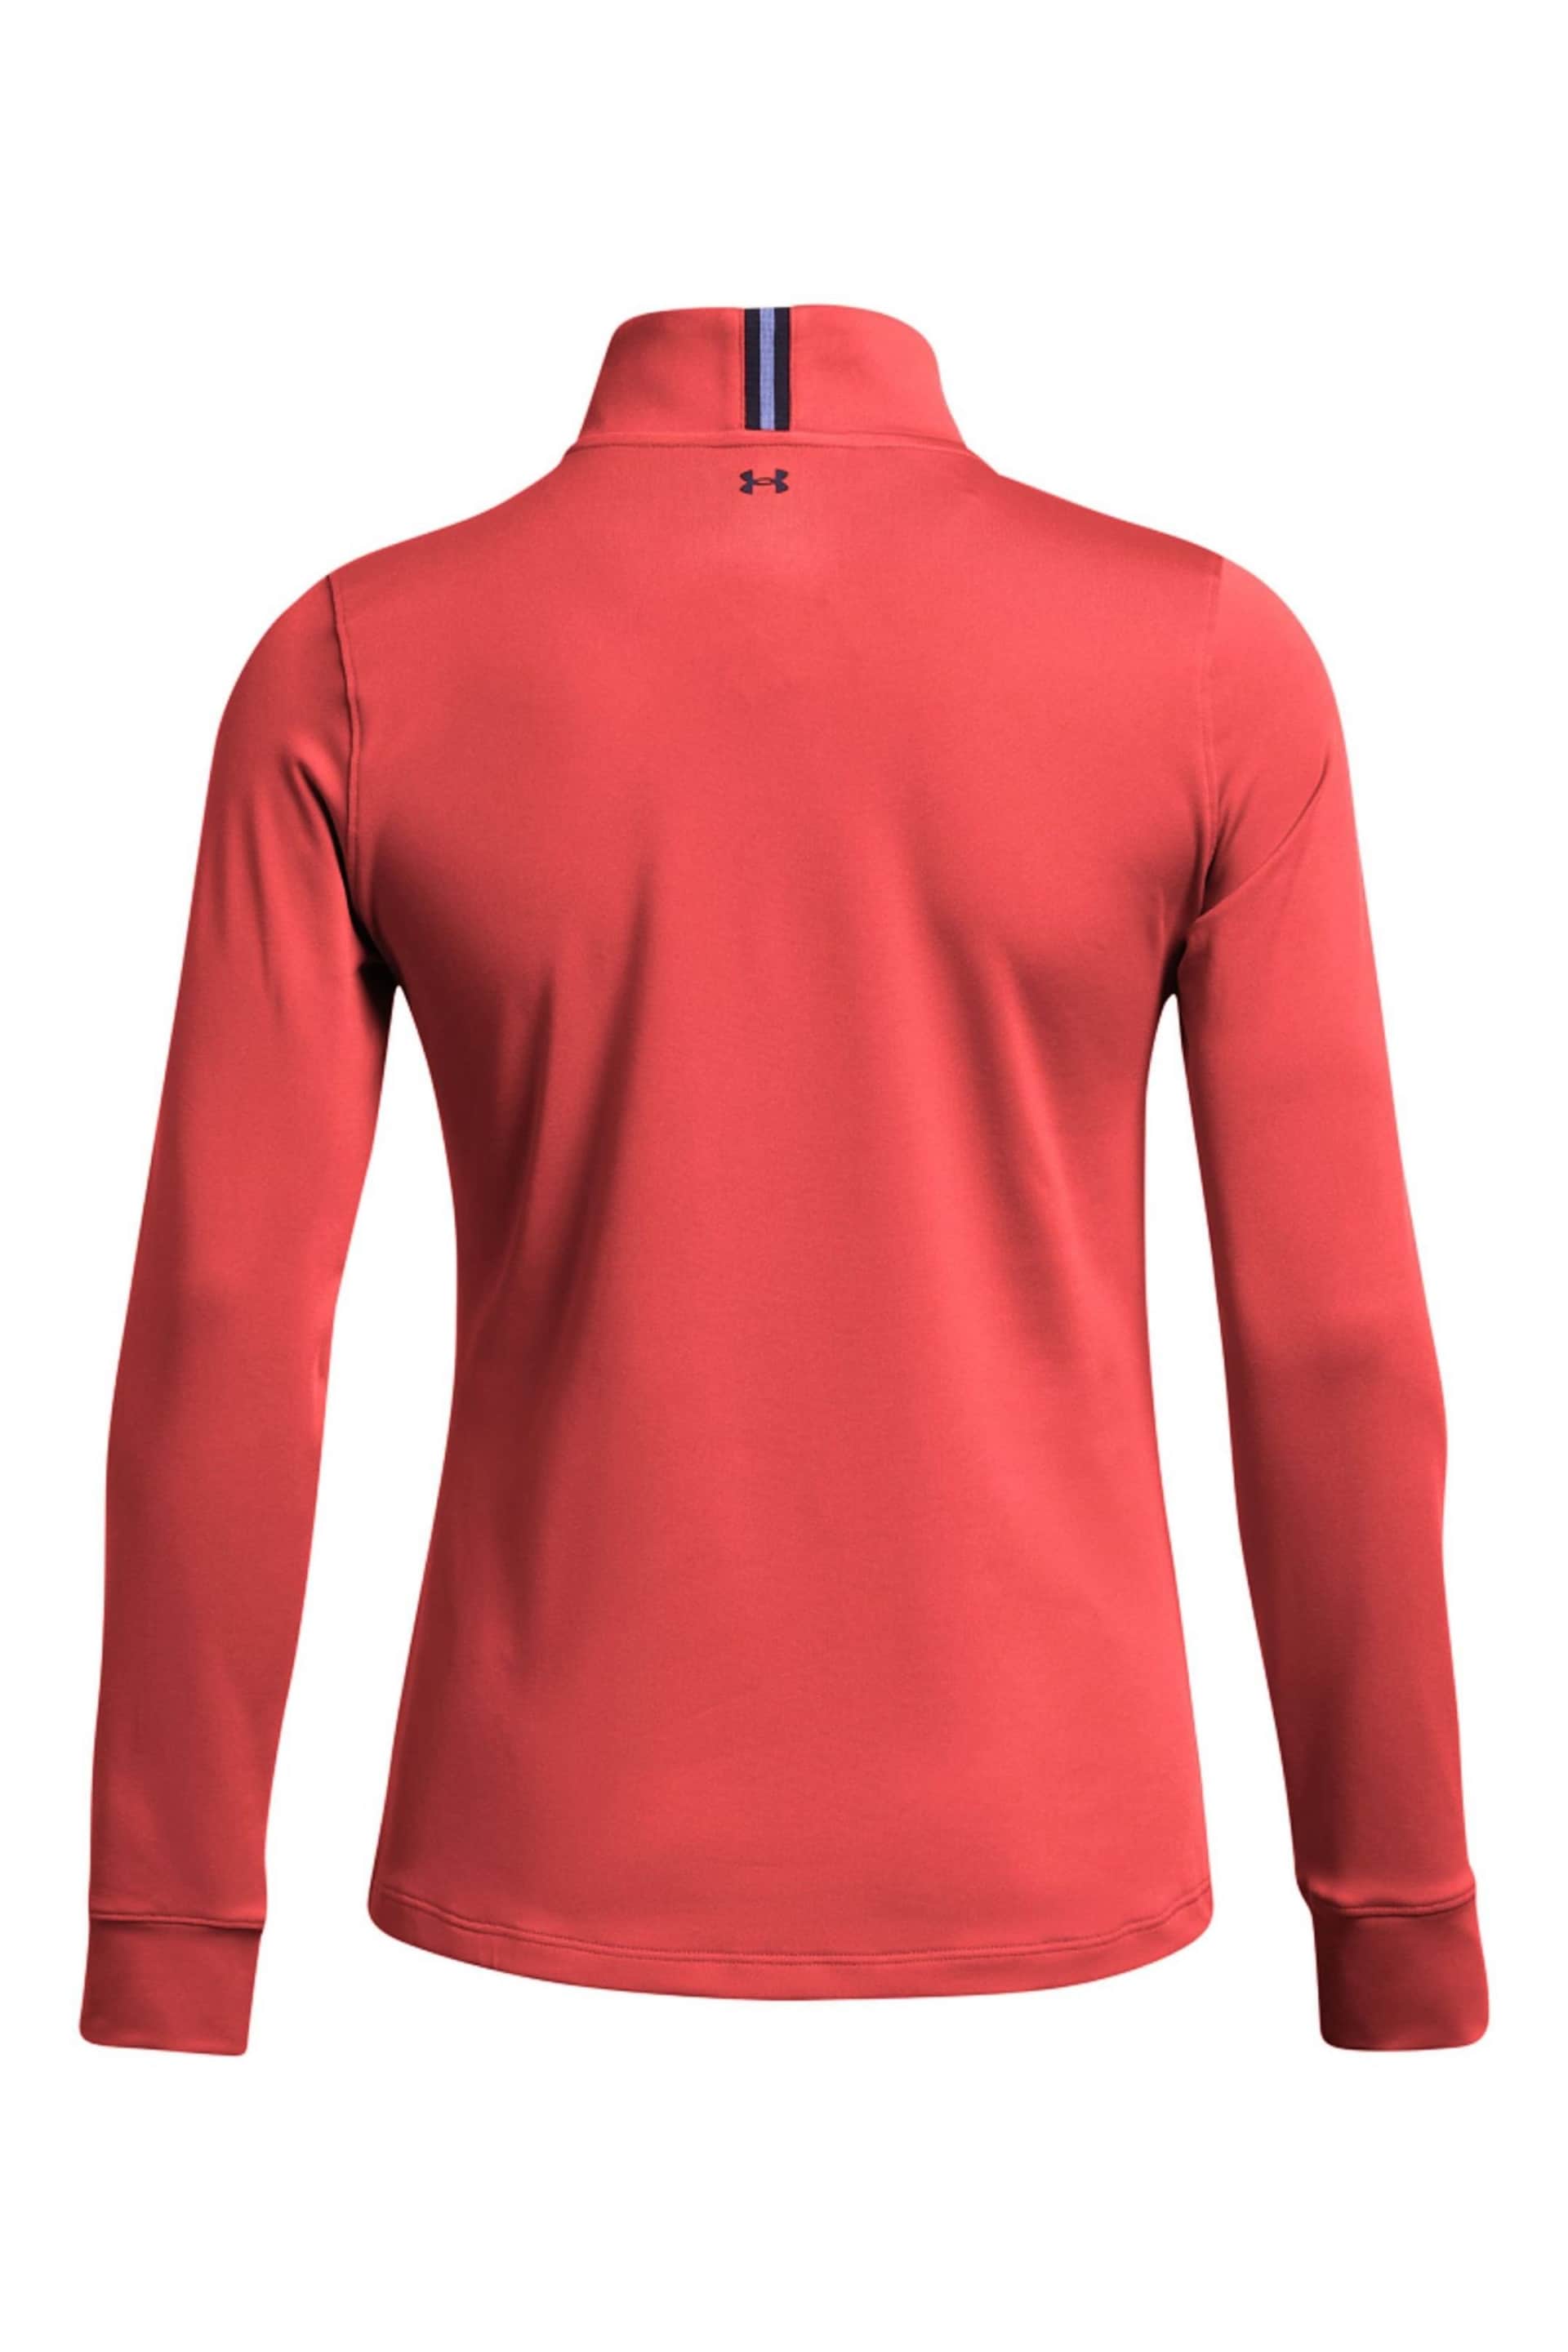 Under Armour Red/Navy Play Off 1/4 Zip Sweat Top - Image 5 of 5